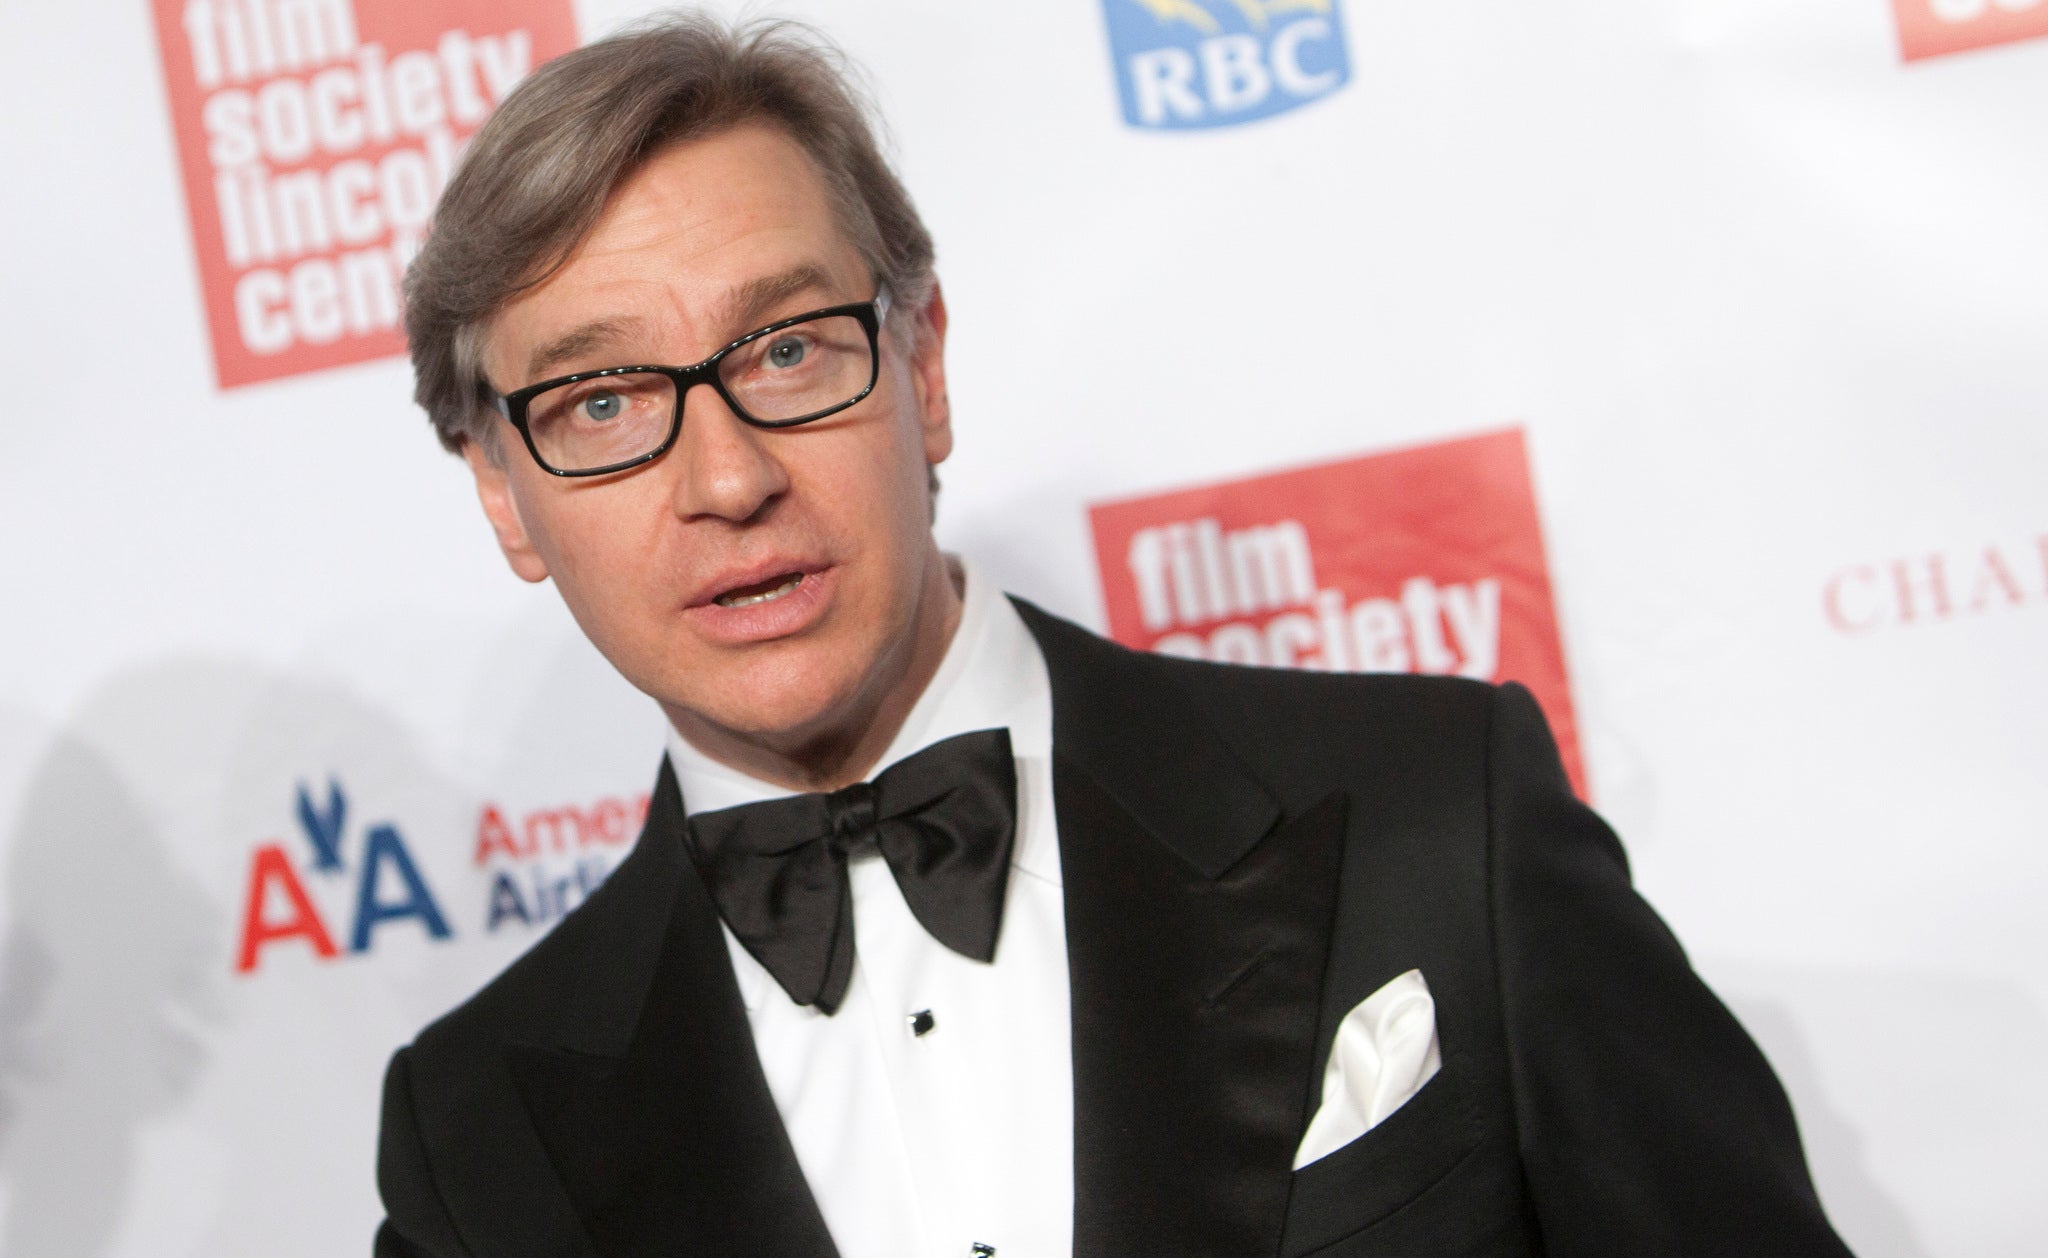 Paul Feig said the 'roles still aren't there for women'